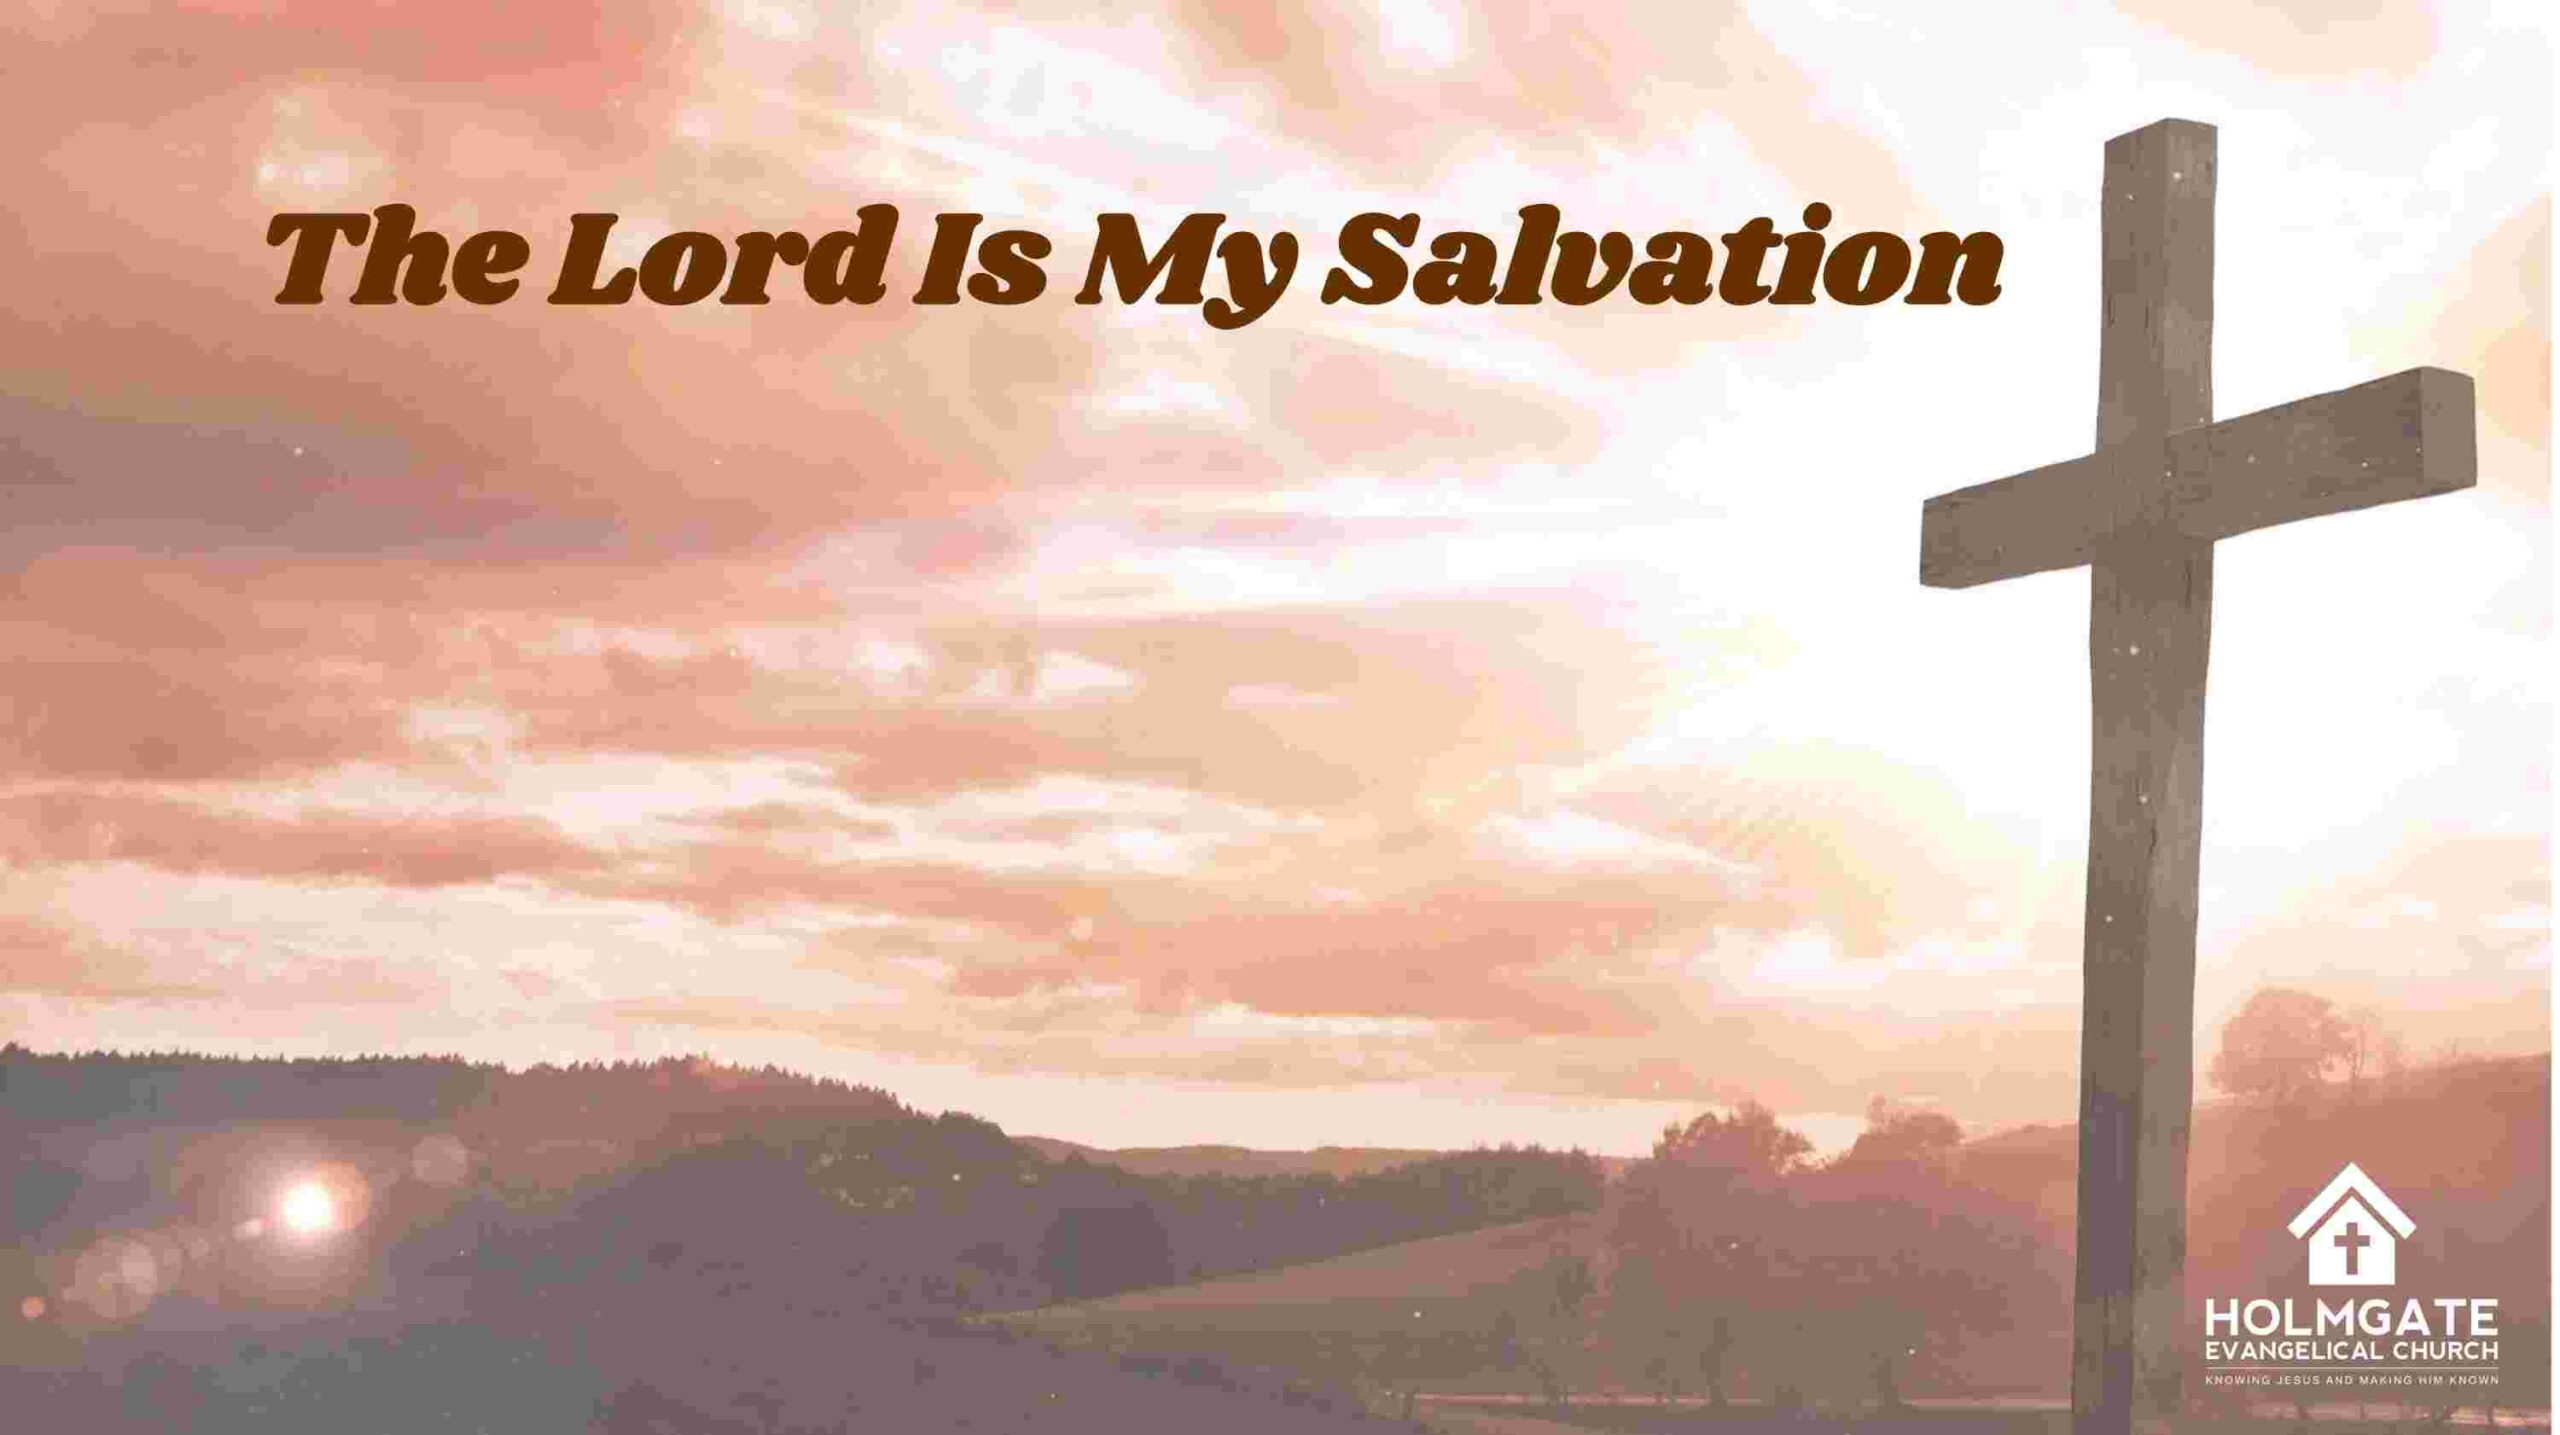 The Lord is my salvation